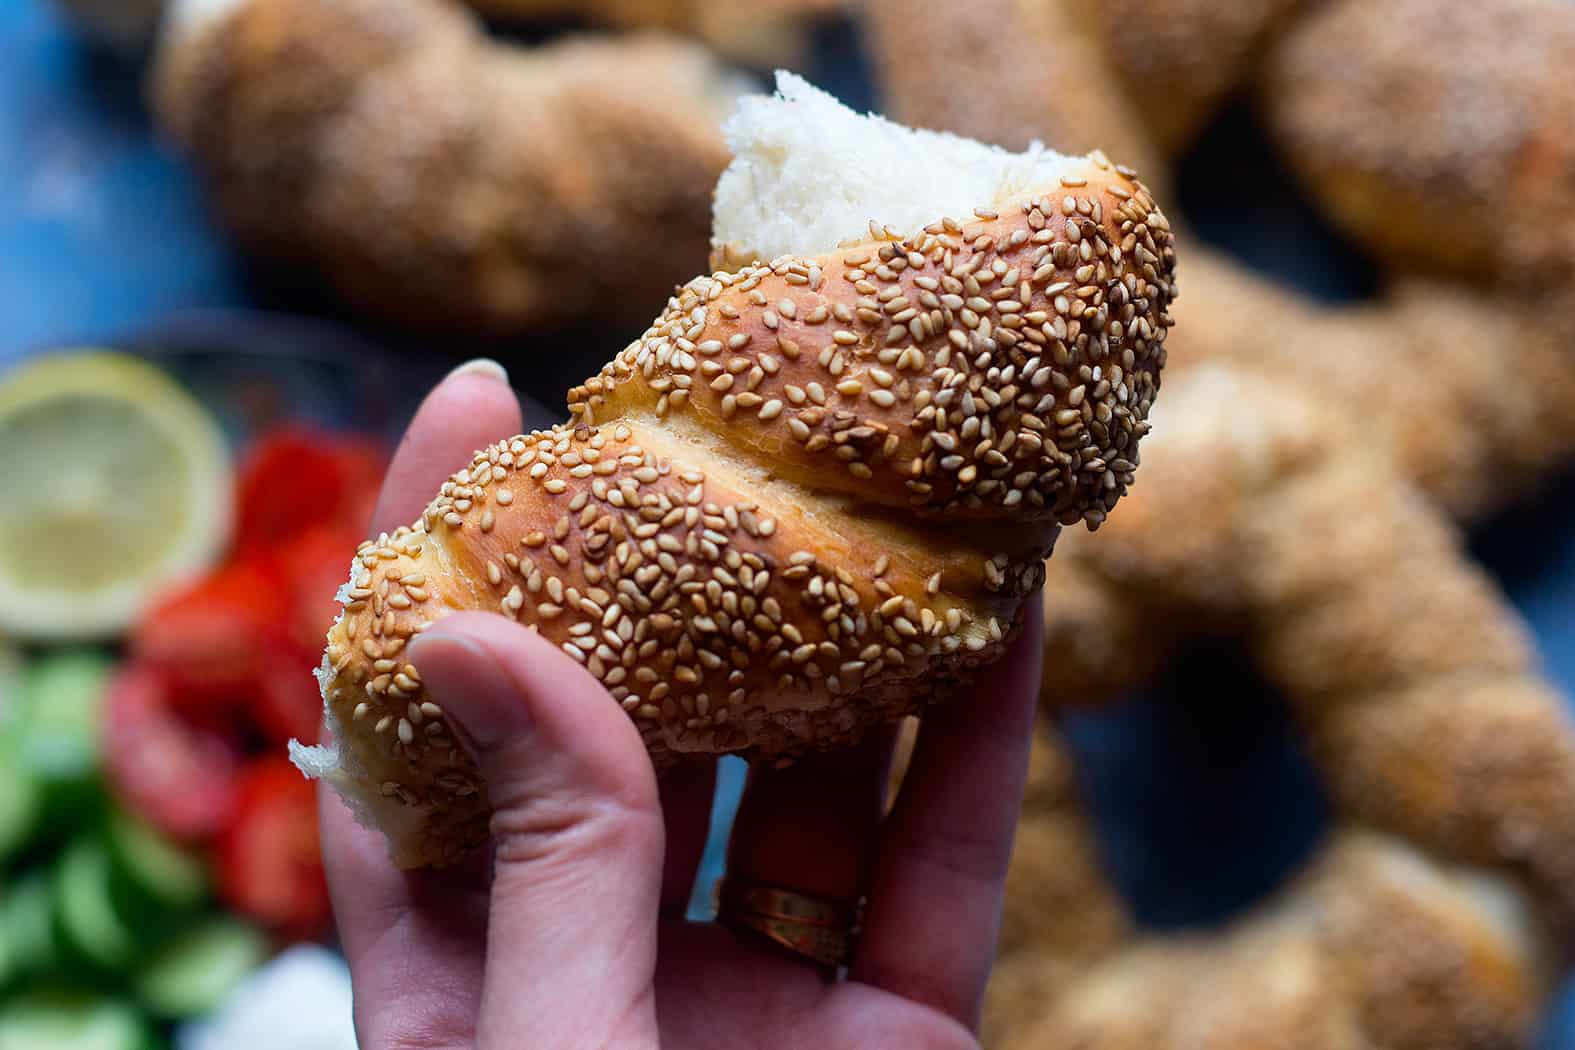 Simit is a sesame crusted, circular bread from Turkey.